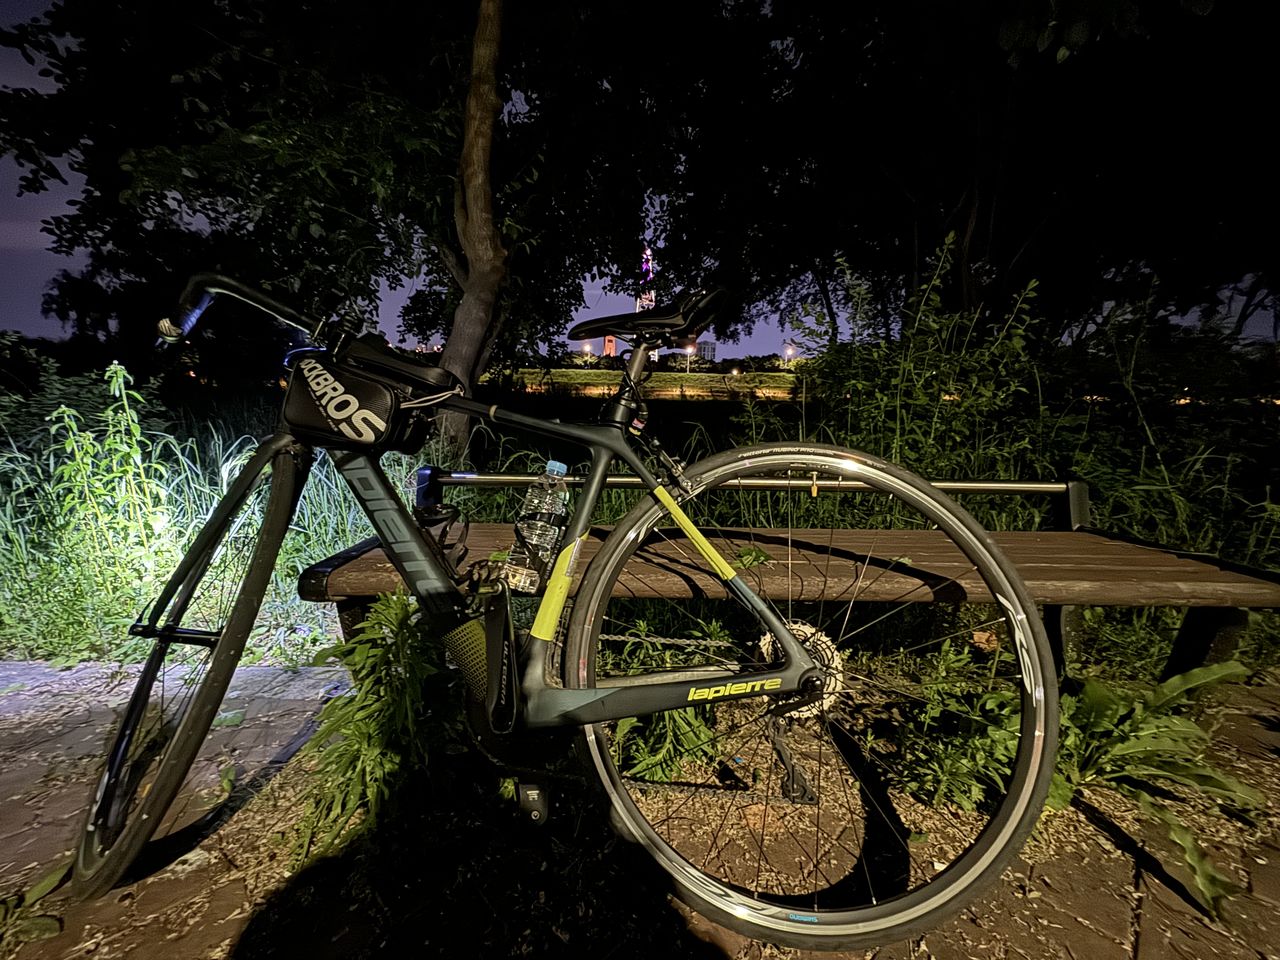 transportation, bicycle, mode of transportation, plant, land vehicle, vehicle, no people, nature, mountain bike, tree, night, wheel, sports equipment, outdoors, cycle sport, cycling, parking, grass, land